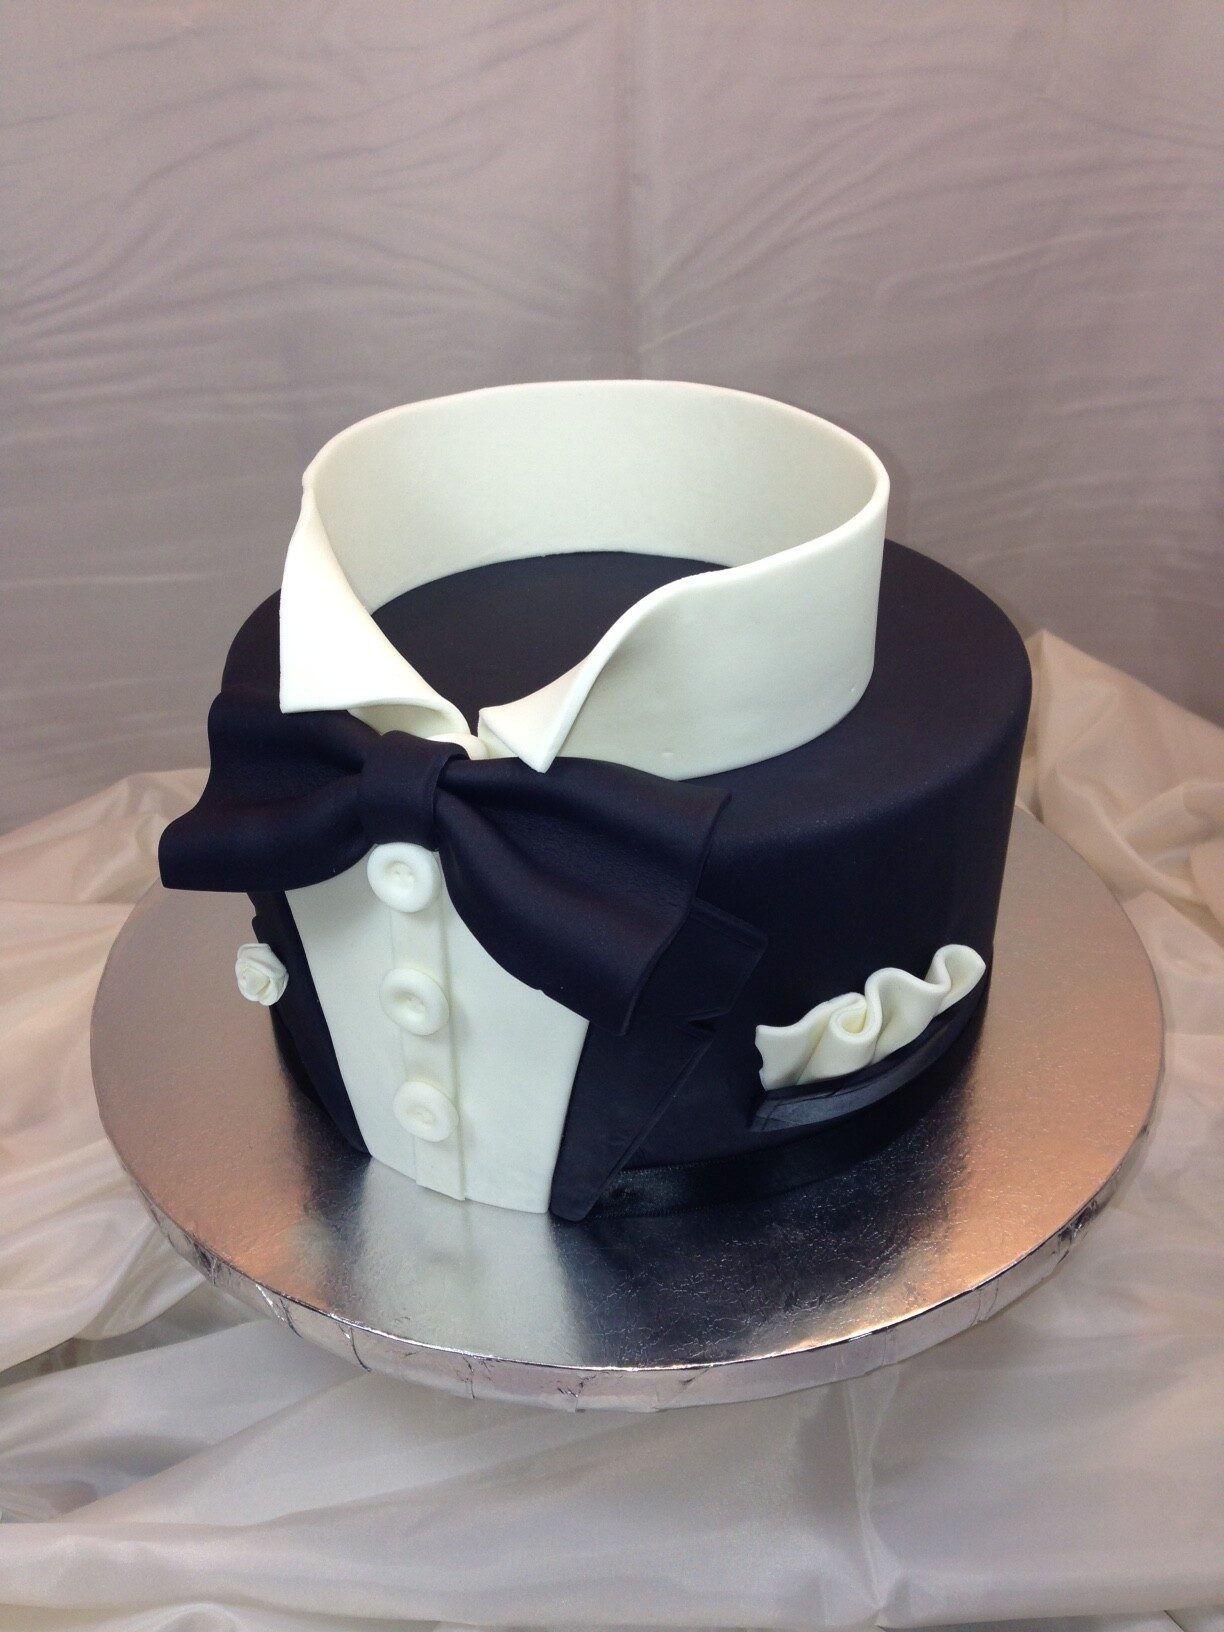 Black Tuxedo Cake with Colourful Buttons and Golden Bow